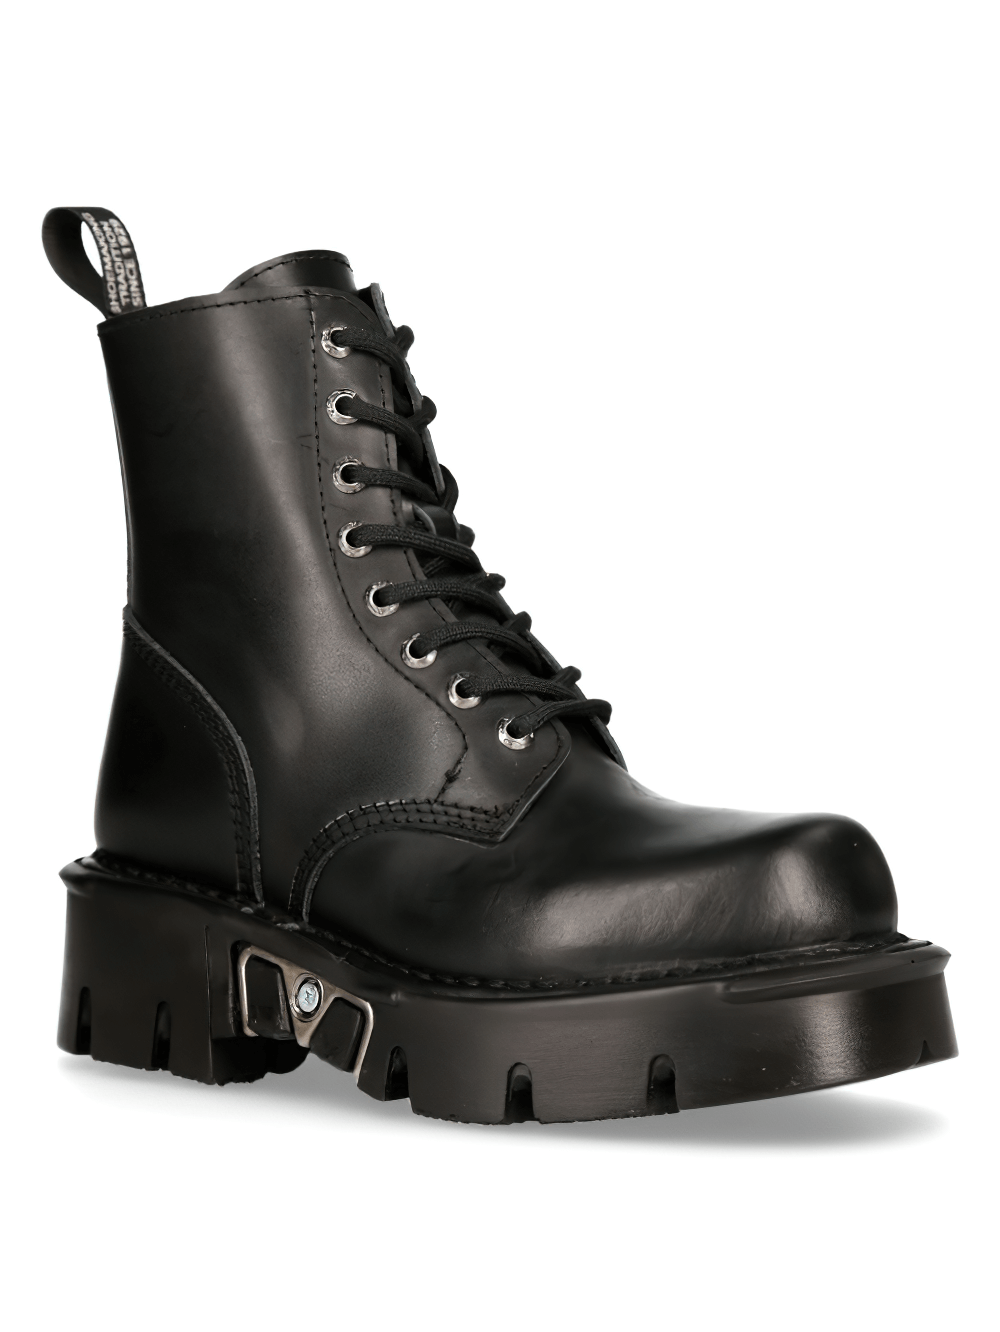 NEW ROCK Black Leather Military-Inspired Platforms Boots